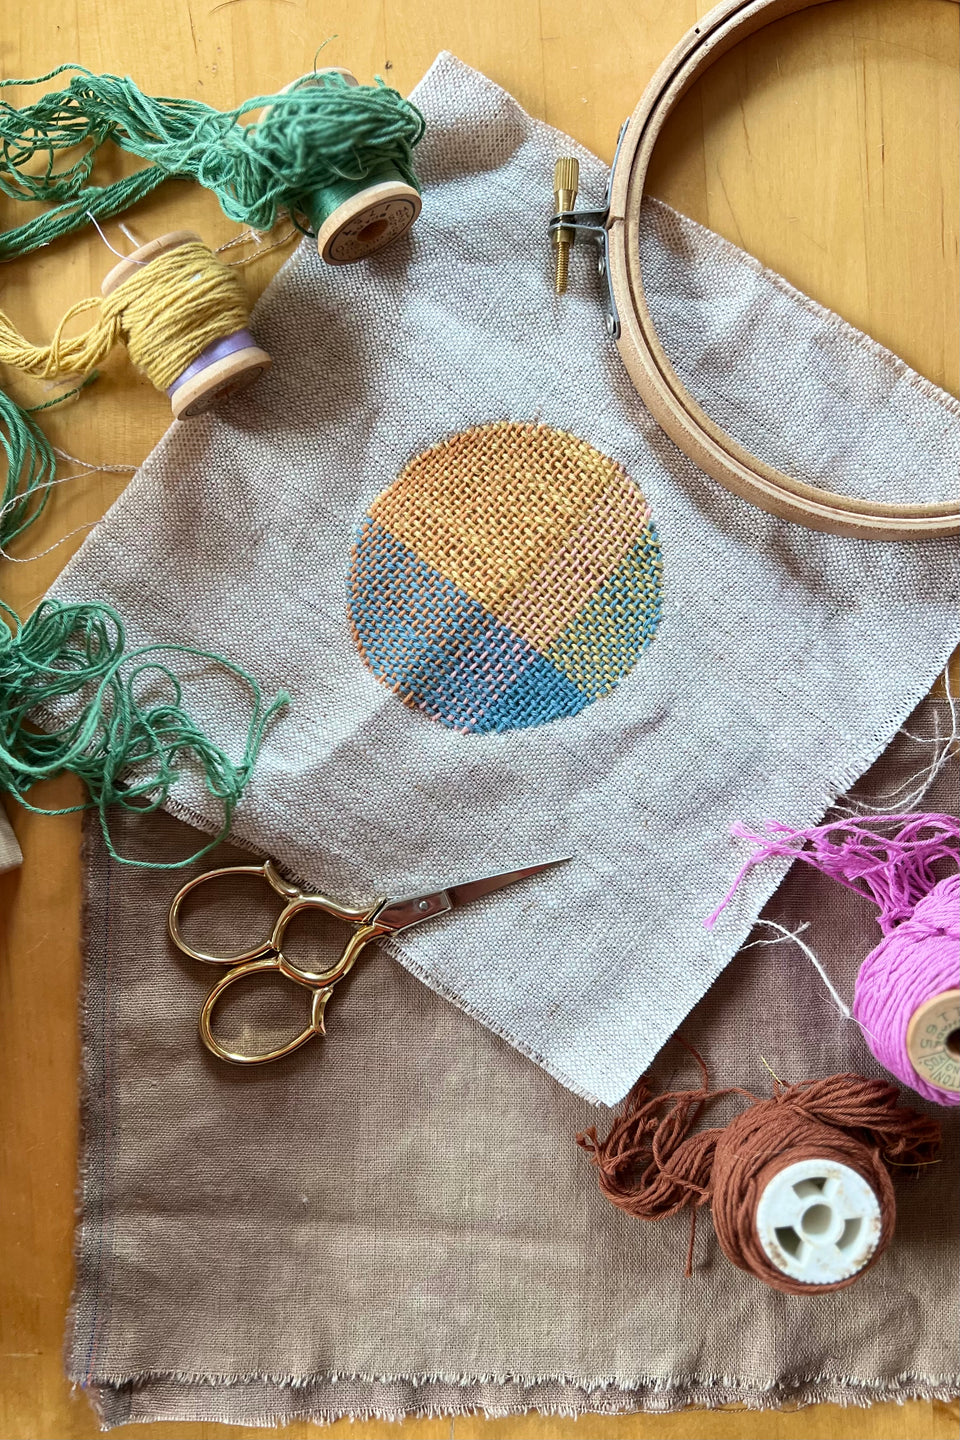 March Sewing 101: Needle Weaving Embroidery